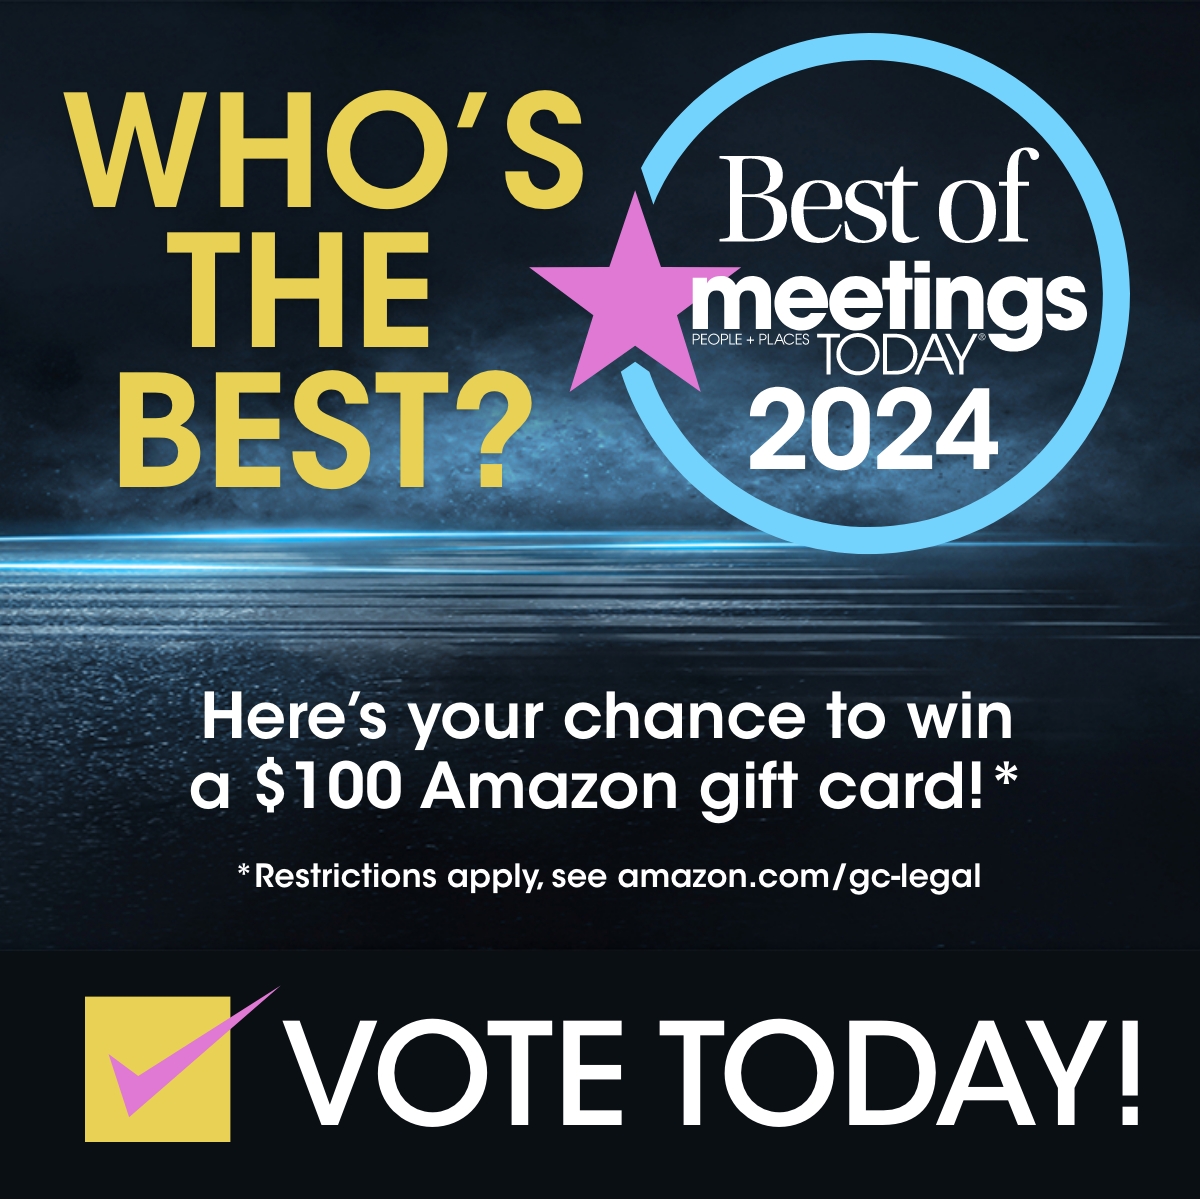 It's time to recognize the best! Nominate your top venues and destinations for the Best of Meetings Today Awards by June 3rd, 2024. Let’s celebrate excellence! Start nominating now! meetingstoday.com/form/best-of-a…

#Destinations #MeetingsIndustry #BestOfAwards #MeetingsAndEvents